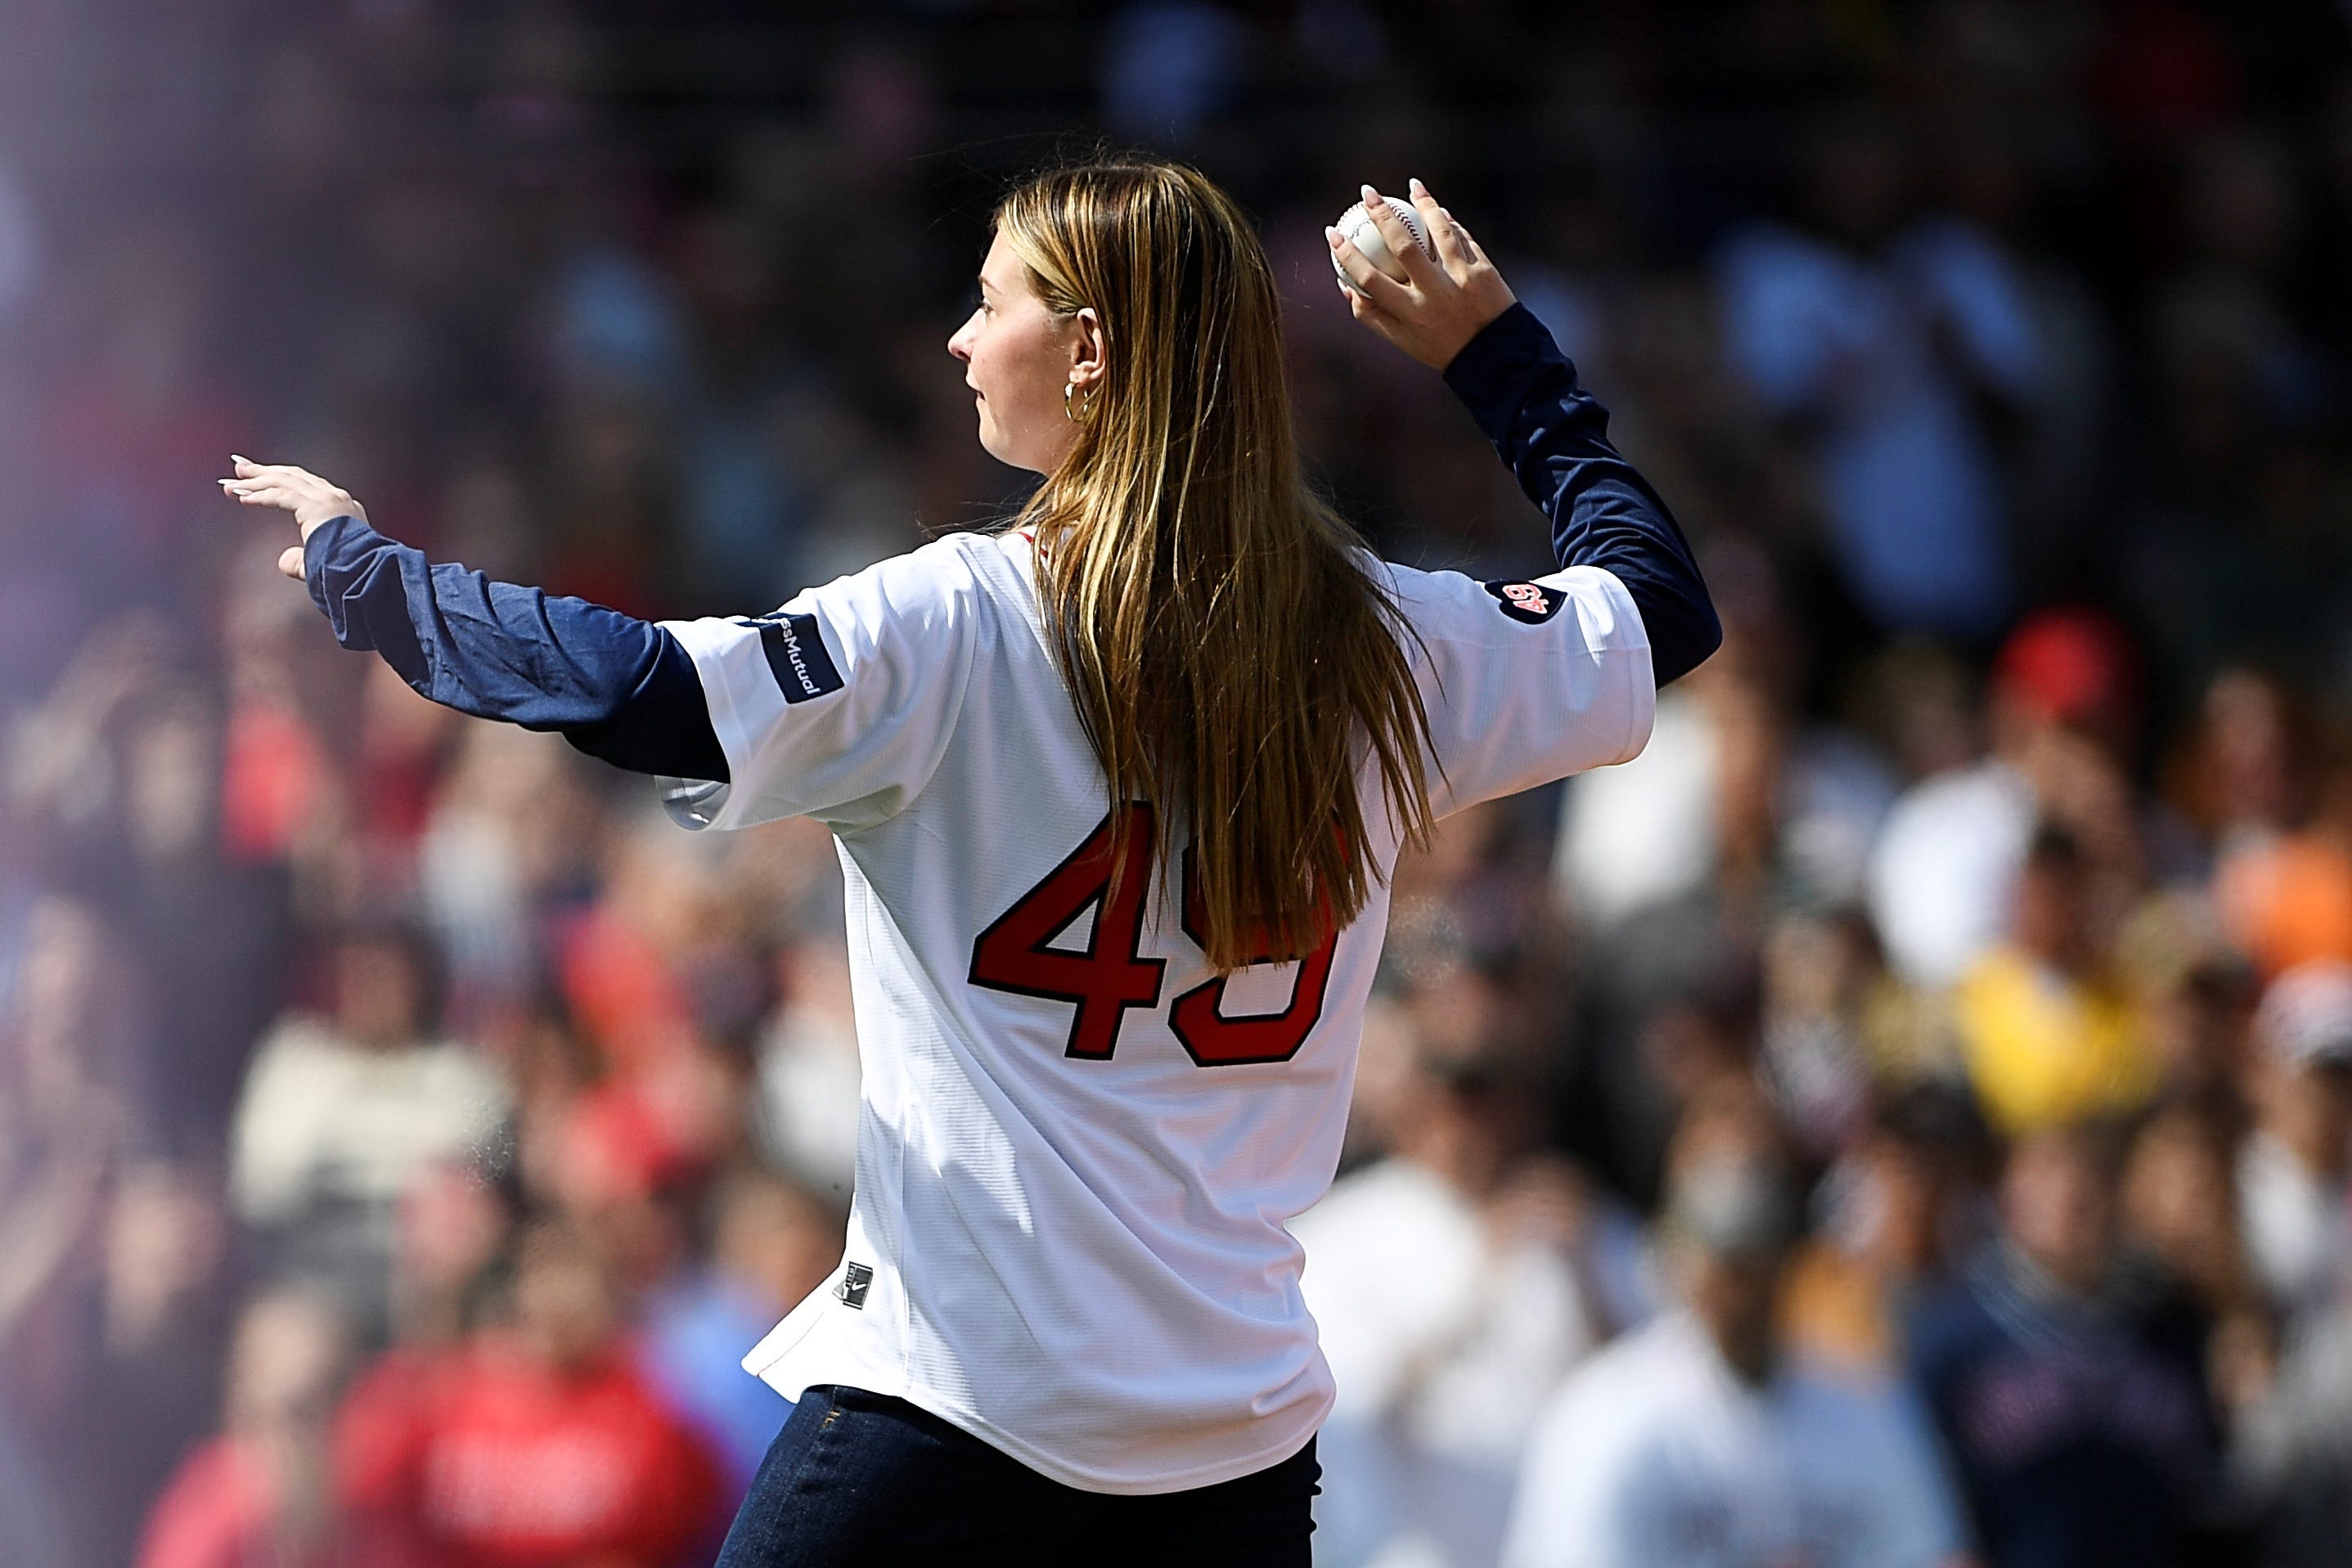 tim wakefield's daughter throwing a first pitch to jason varitek was a beautiful, sad moment